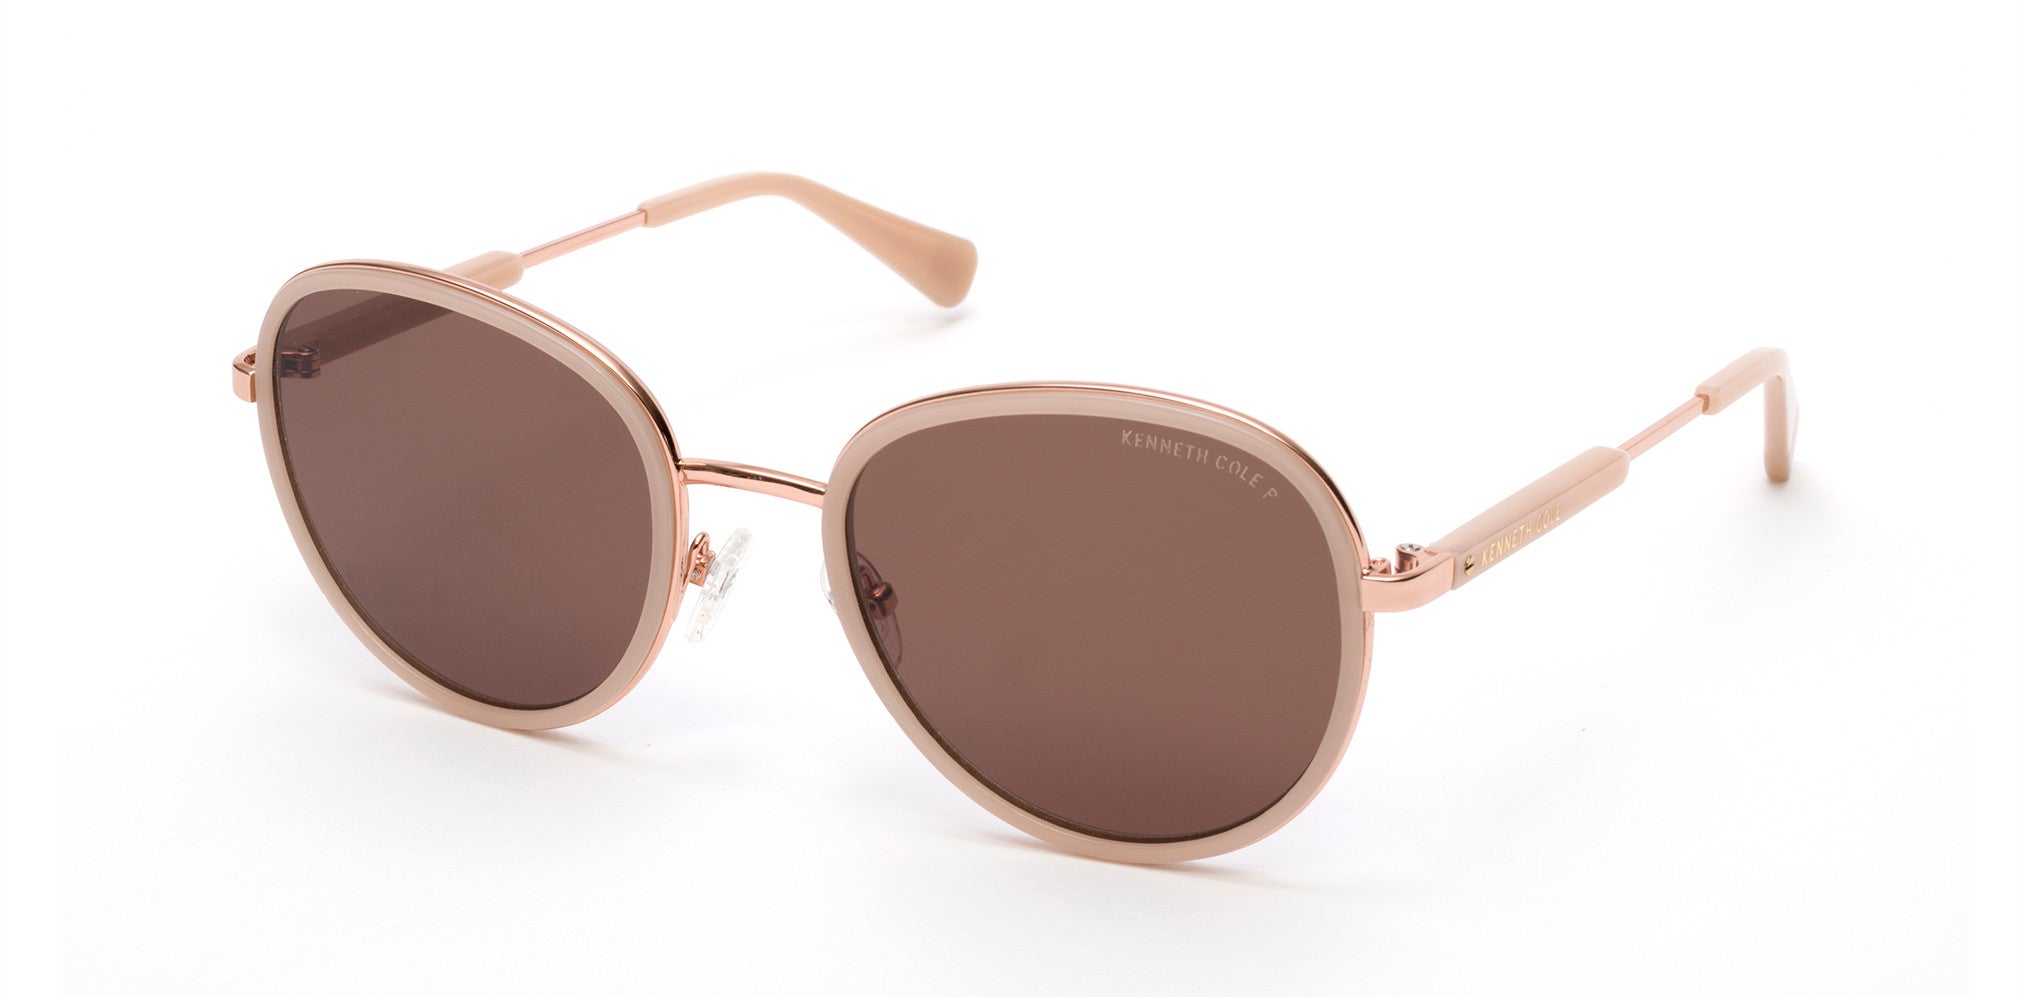 Kenneth Cole New York,Kenneth Cole Reaction KC7227 Round Sunglasses 57H-57H - Shiny Beige / Brown Polarized Lenses